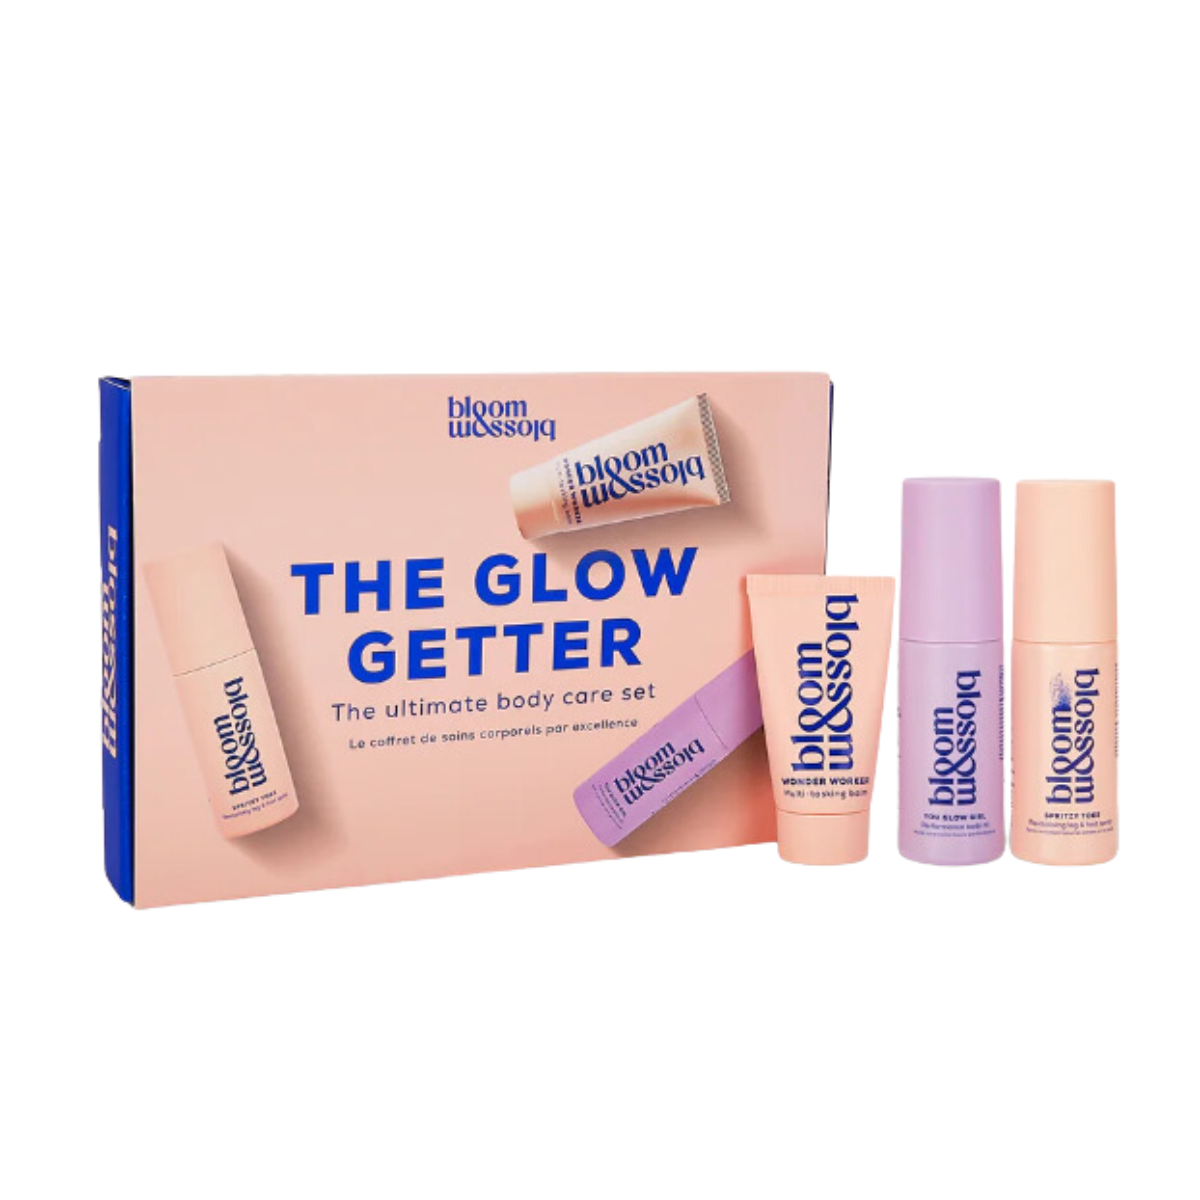 Bloom & Blossom The Glow Getter: The Ultimate Body Care Set